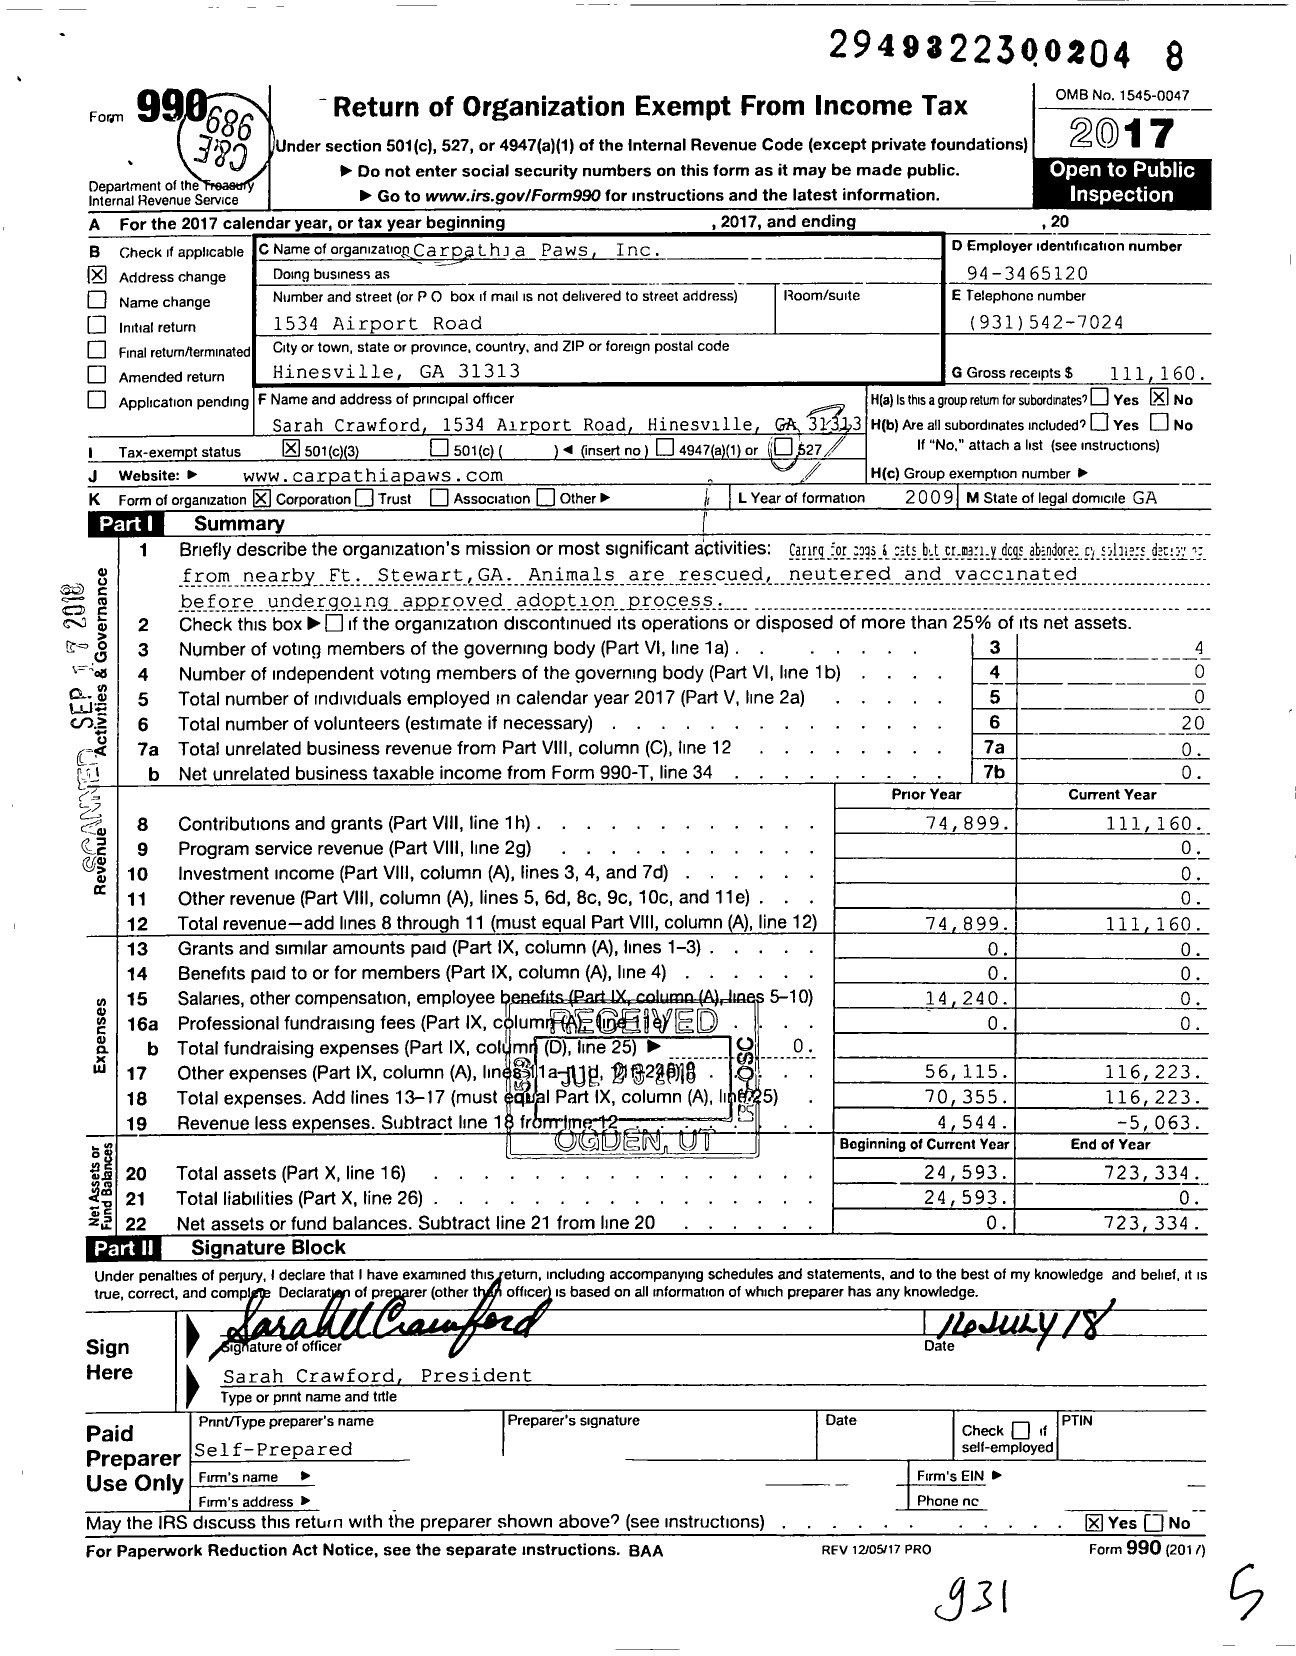 Image of first page of 2017 Form 990 for Carpathia Paws